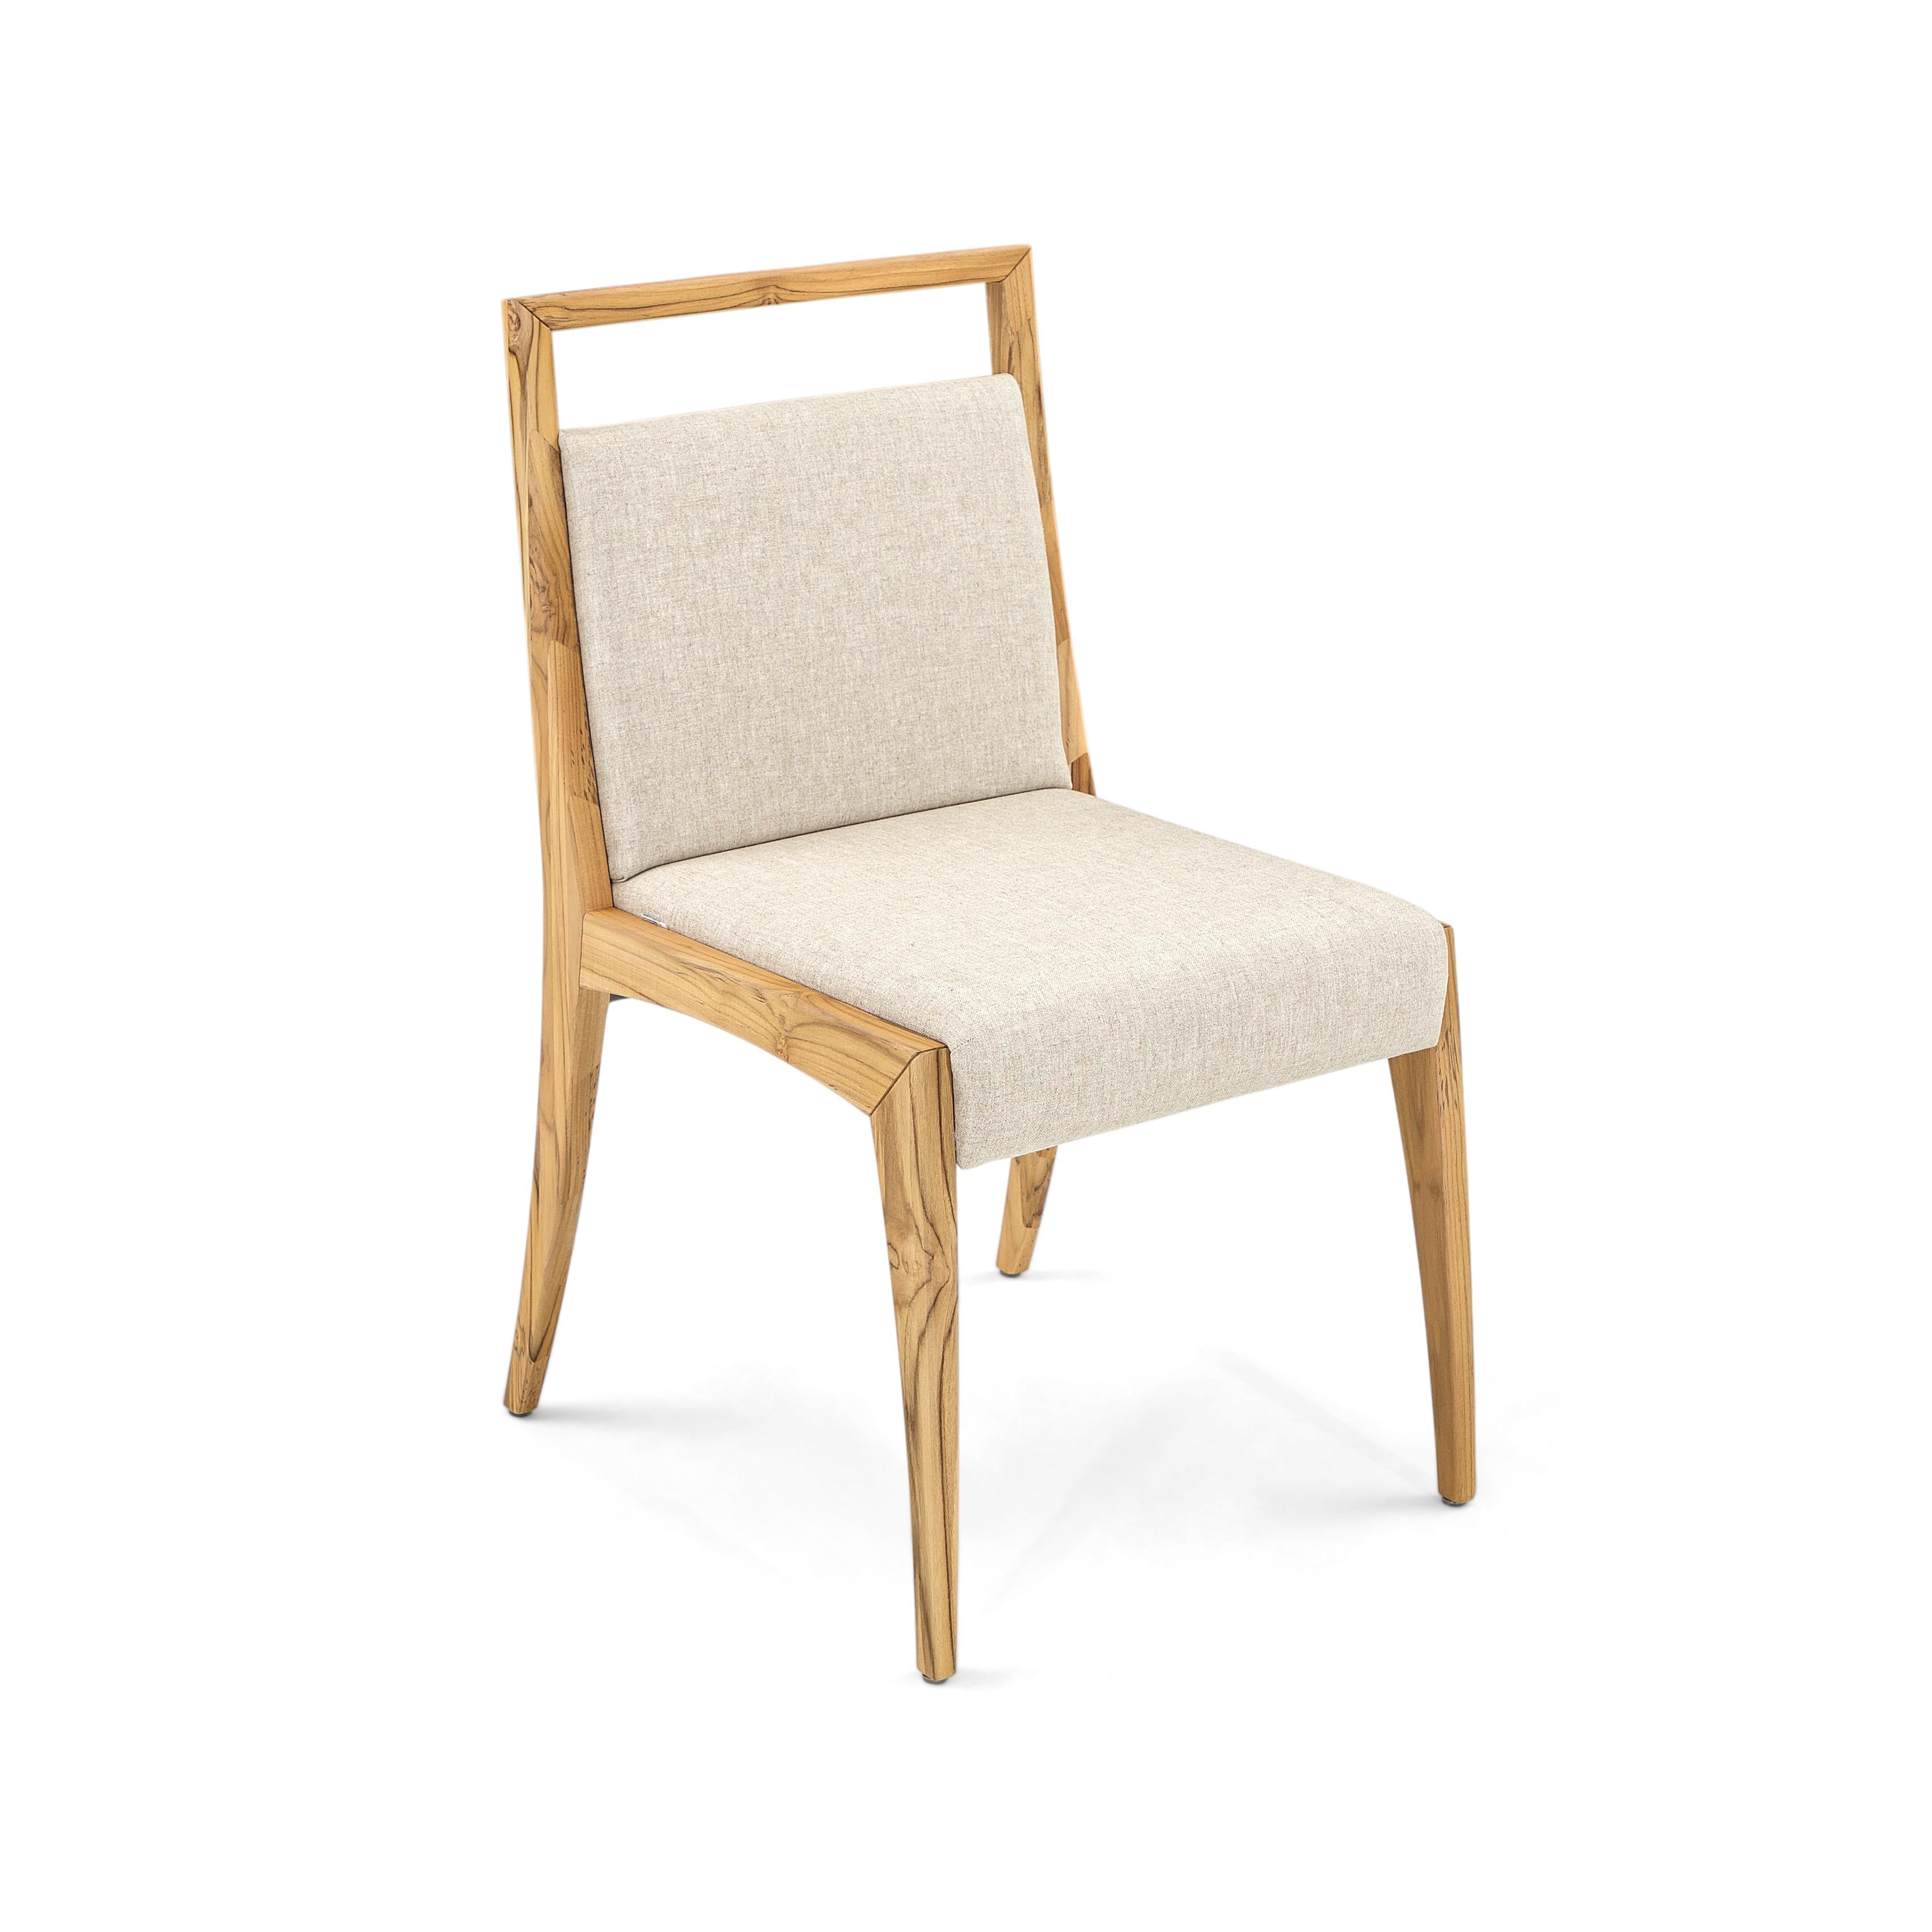 Sotto Dining Chair with a Teak Wood Finish and Beige Fabric, set of 2 In New Condition For Sale In Miami, FL